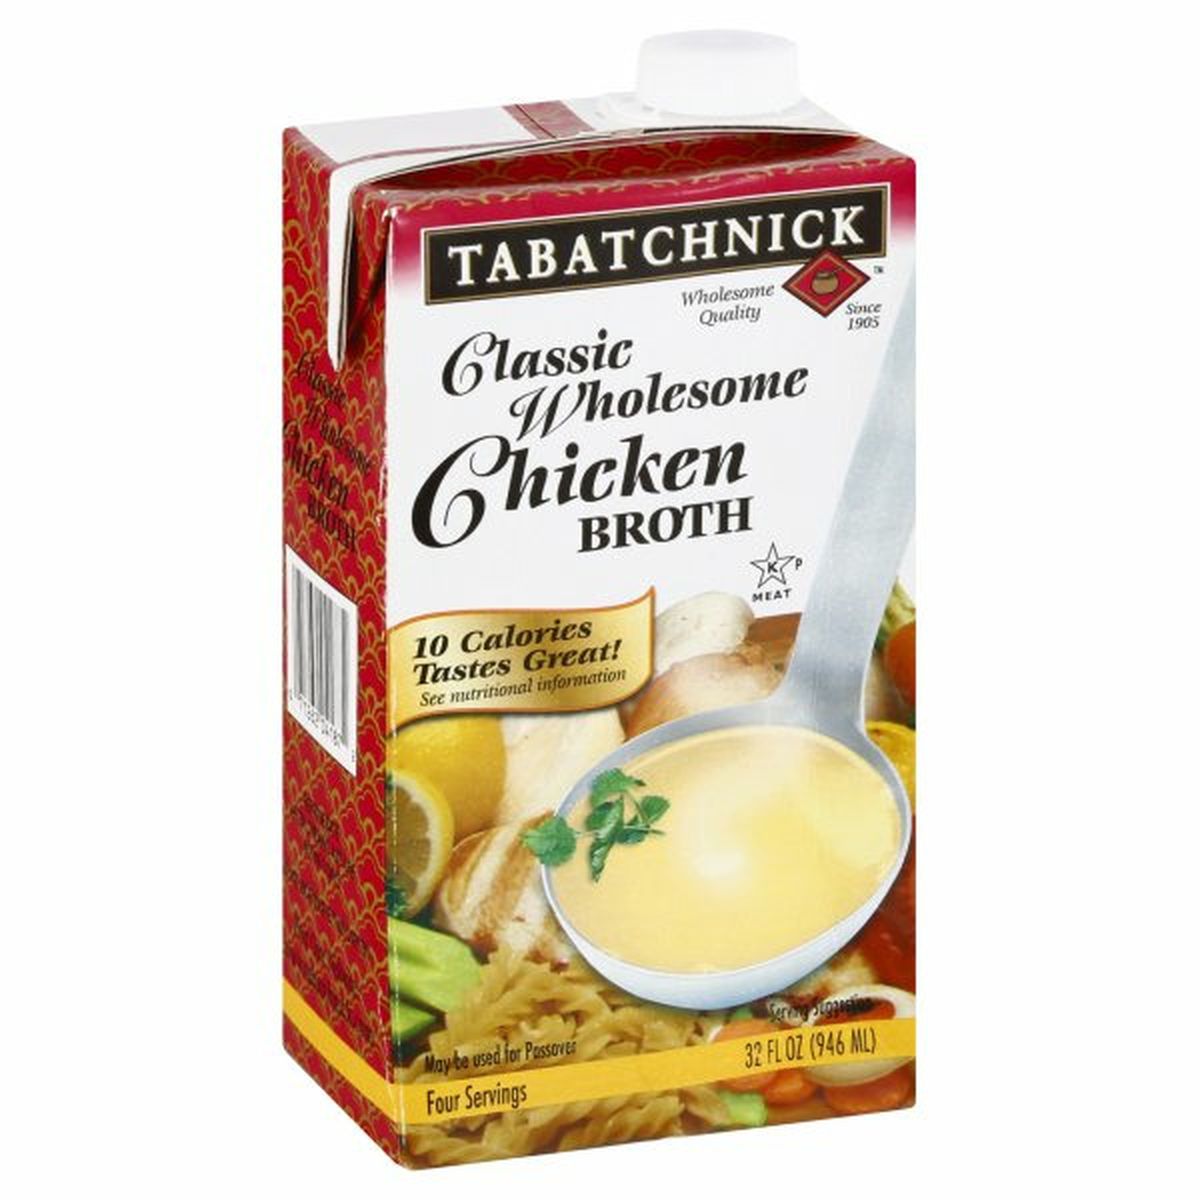 Calories in Tabatchnick Broth, Chicken, Classic Wholesome